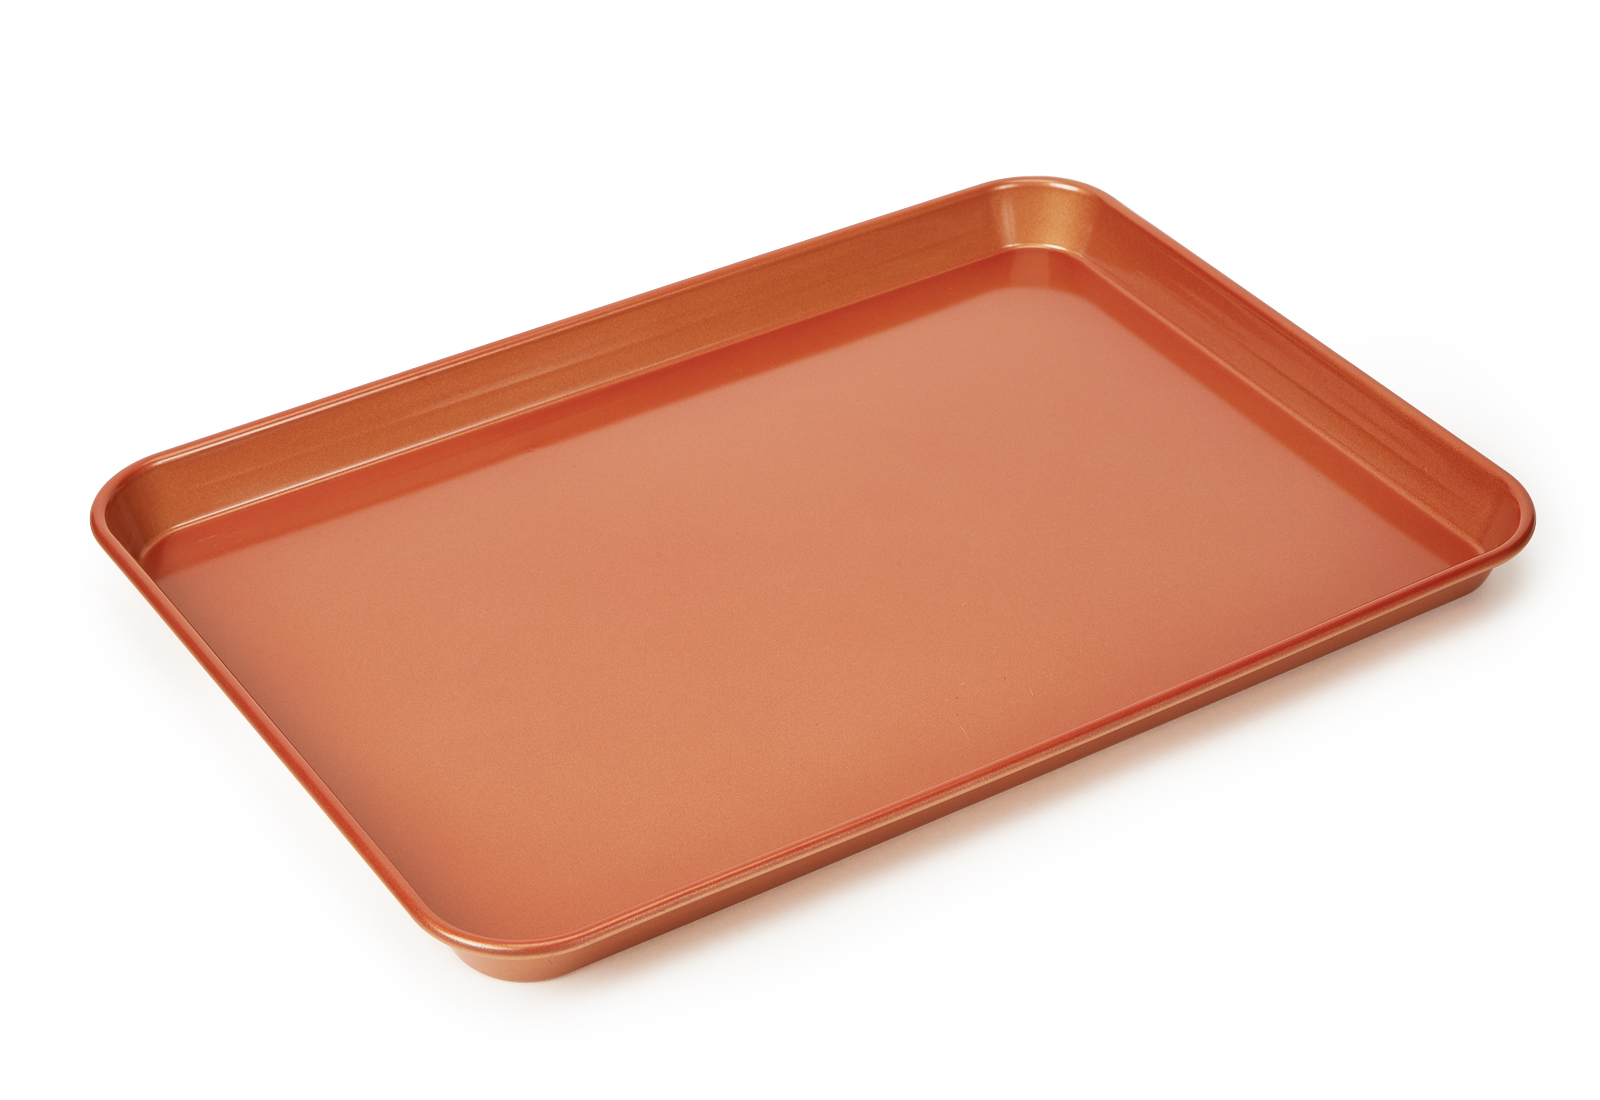 Copper Chef Cookie Sheet Product Image